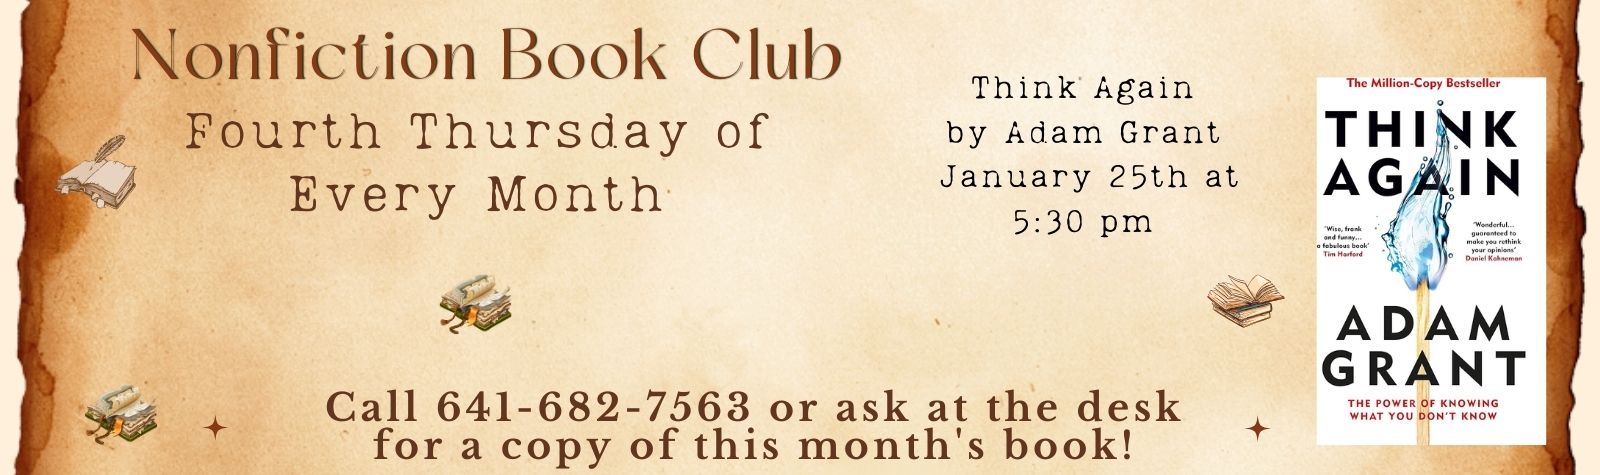 Nonfiction Book Club: January Meeting